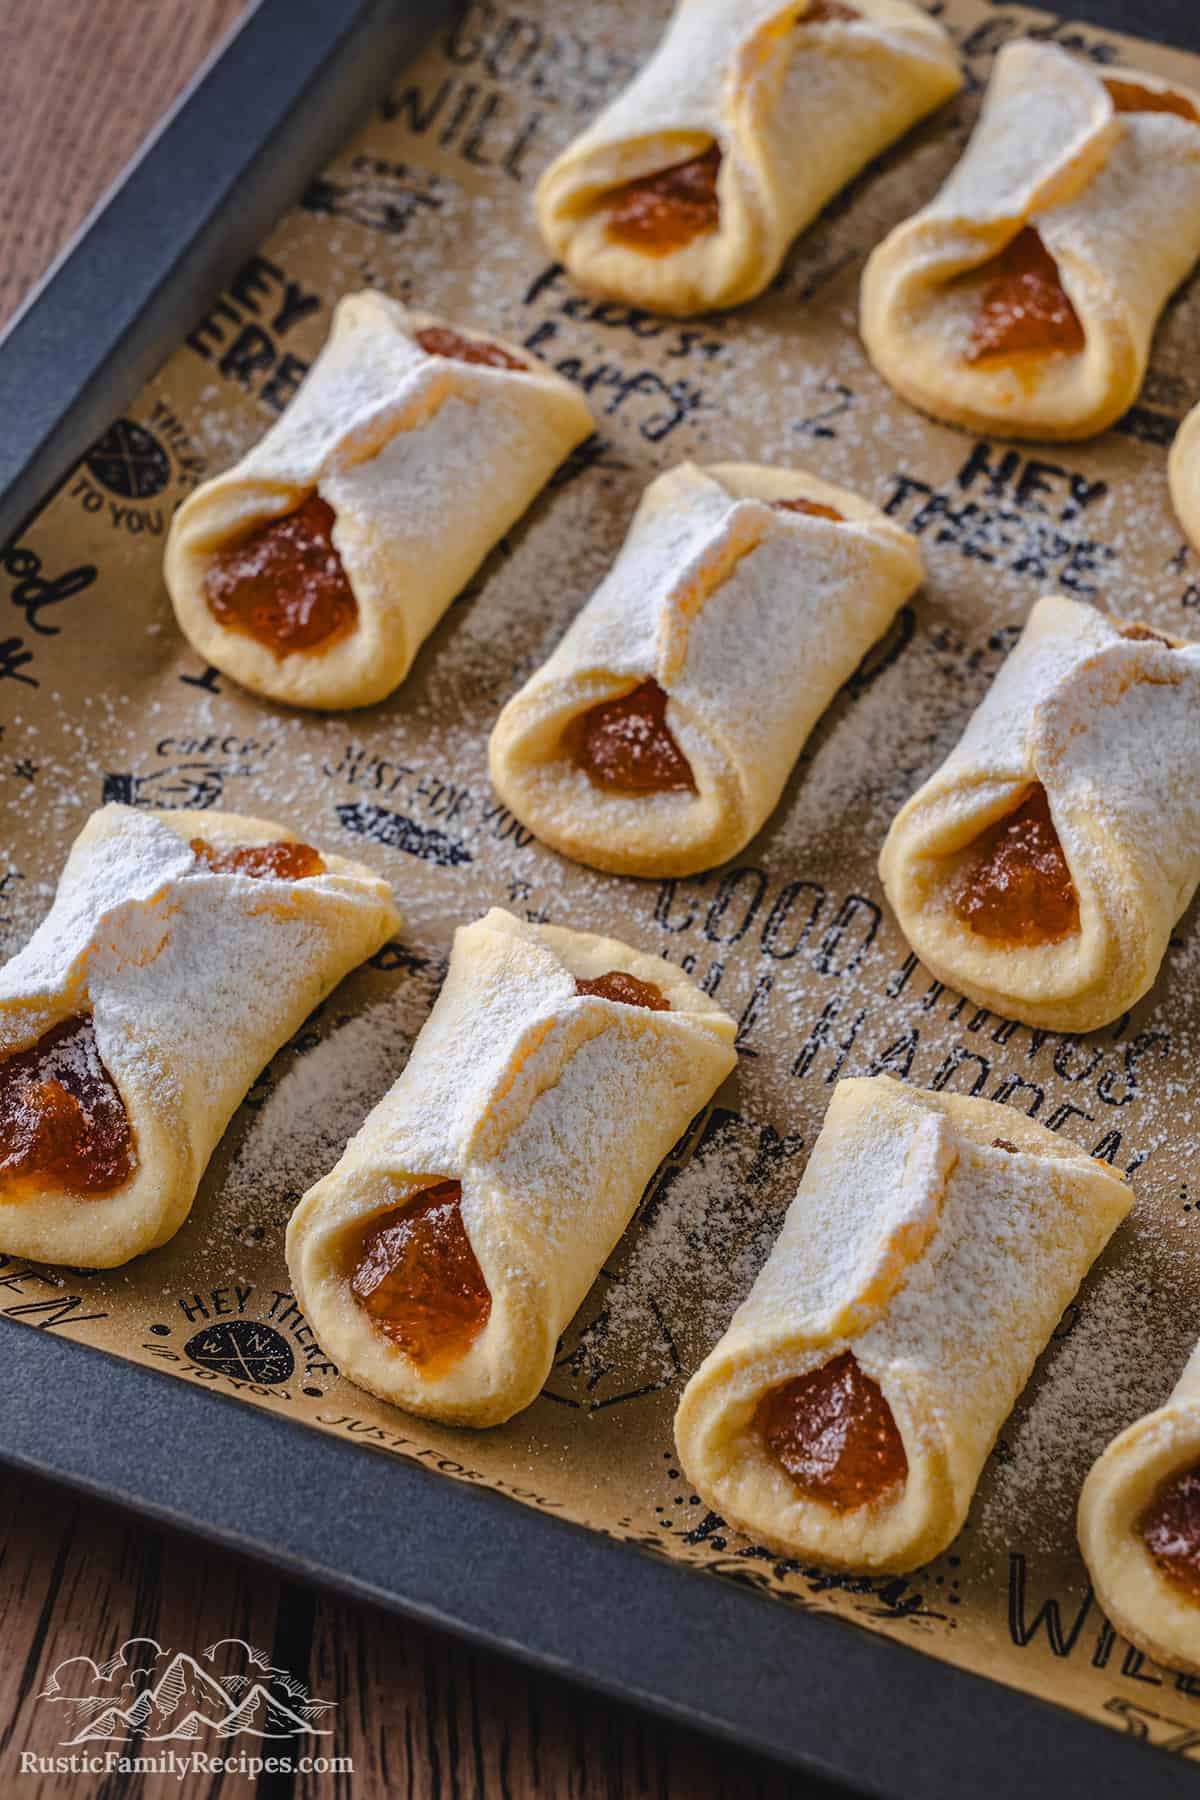 Rows of jam-filled pizzicati cookies dusted with powdered sugar on a parchment-lined baking sheet.